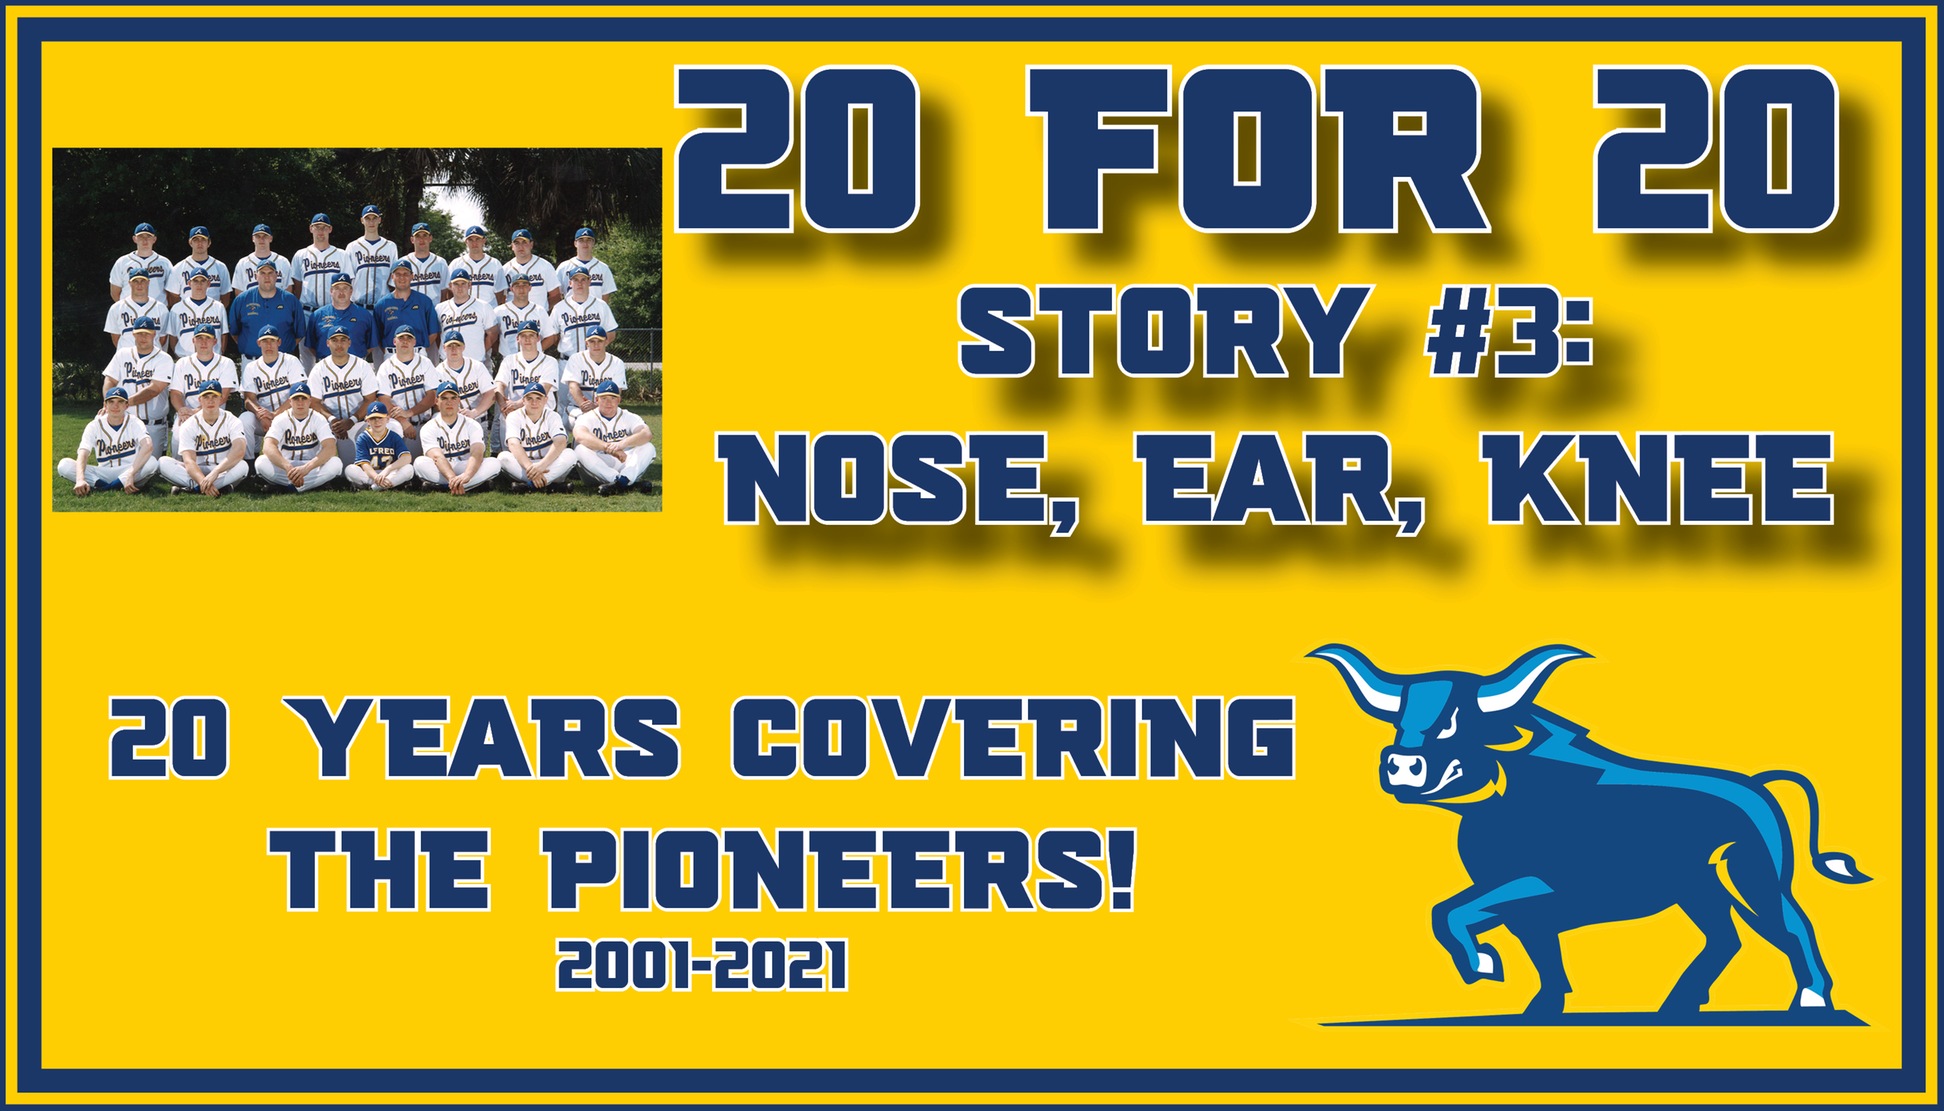 20 for 20 - Story #3 - Picture features the 2002-03 baseball team.